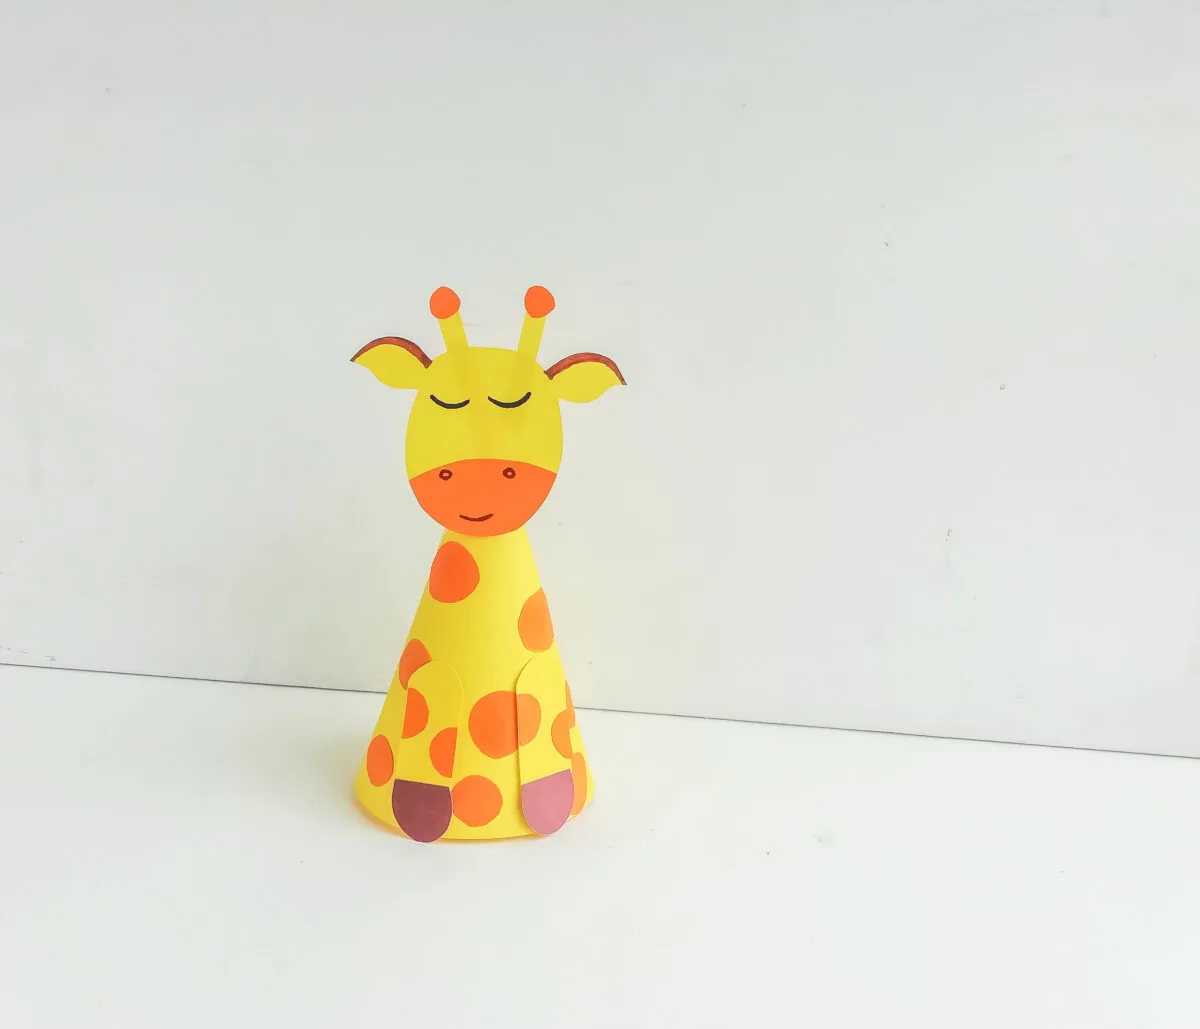 This fun paper giraffe craft for kids includes a free printable template that makes it easy to create a cone-shaped giraffe that stands tall!